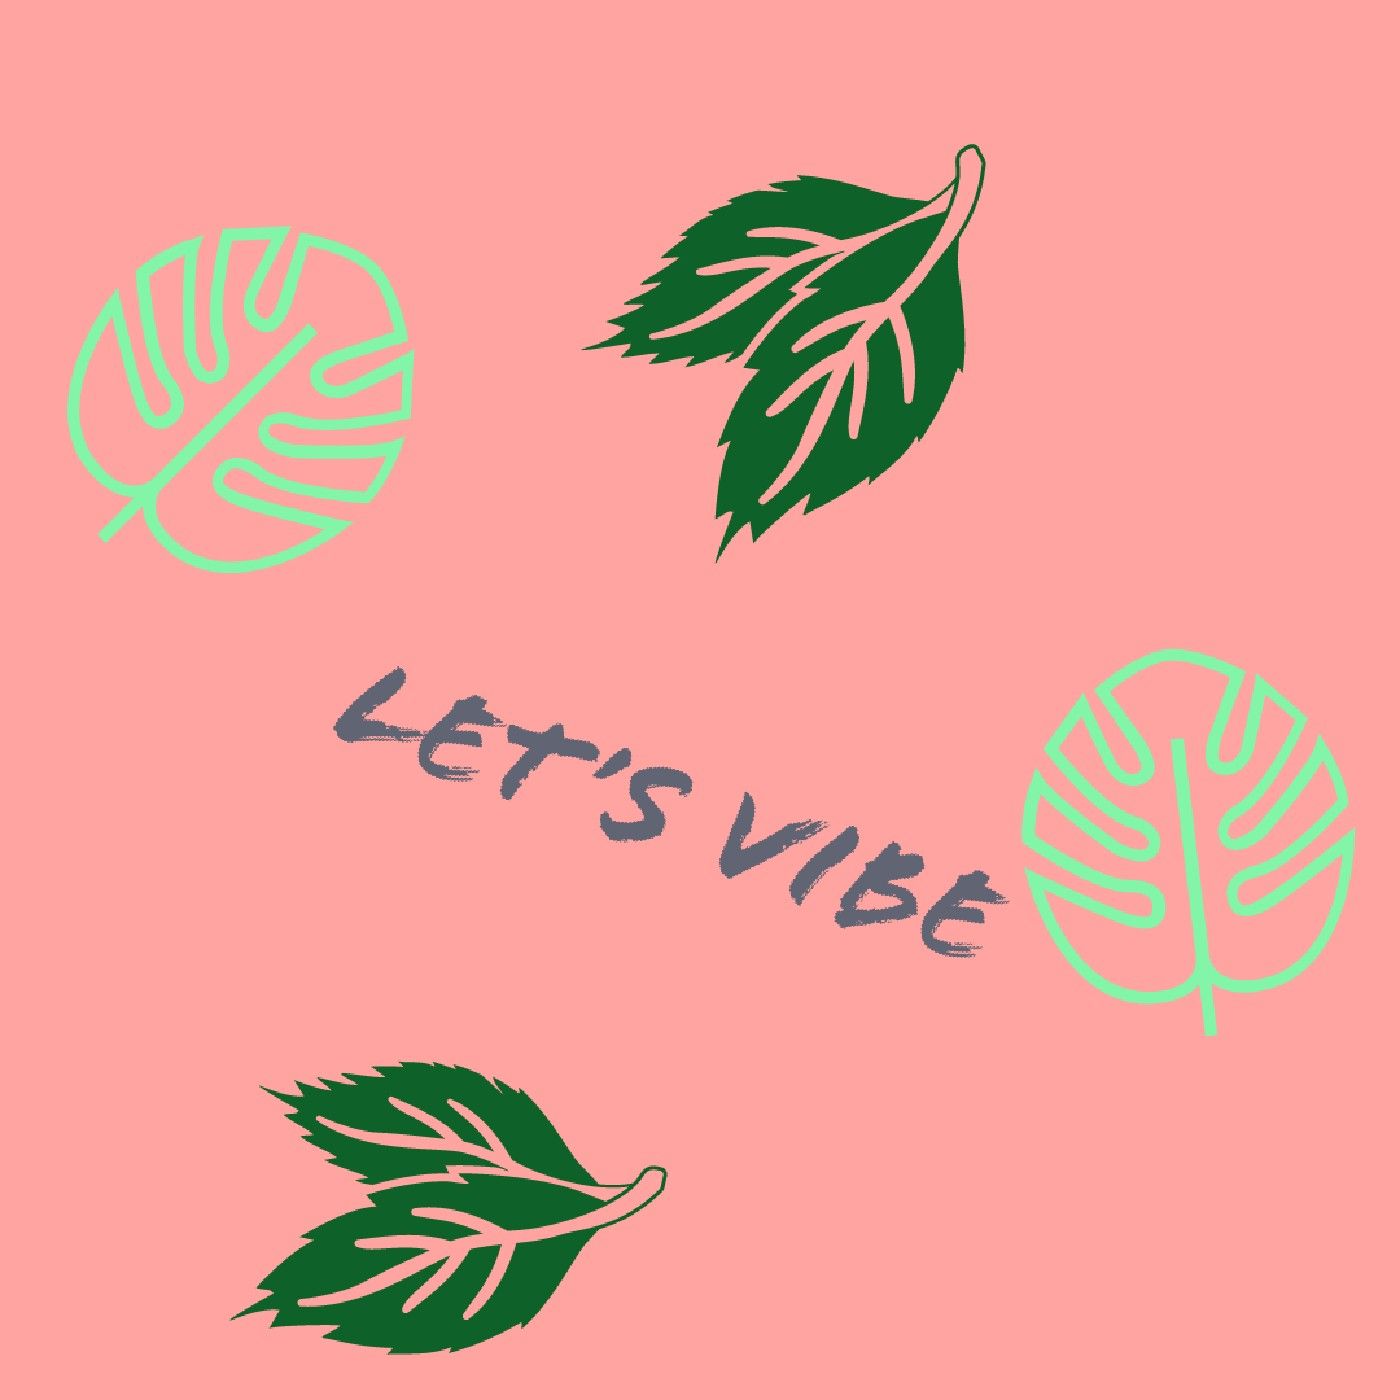 Episode 2 - Let's Vibe Music